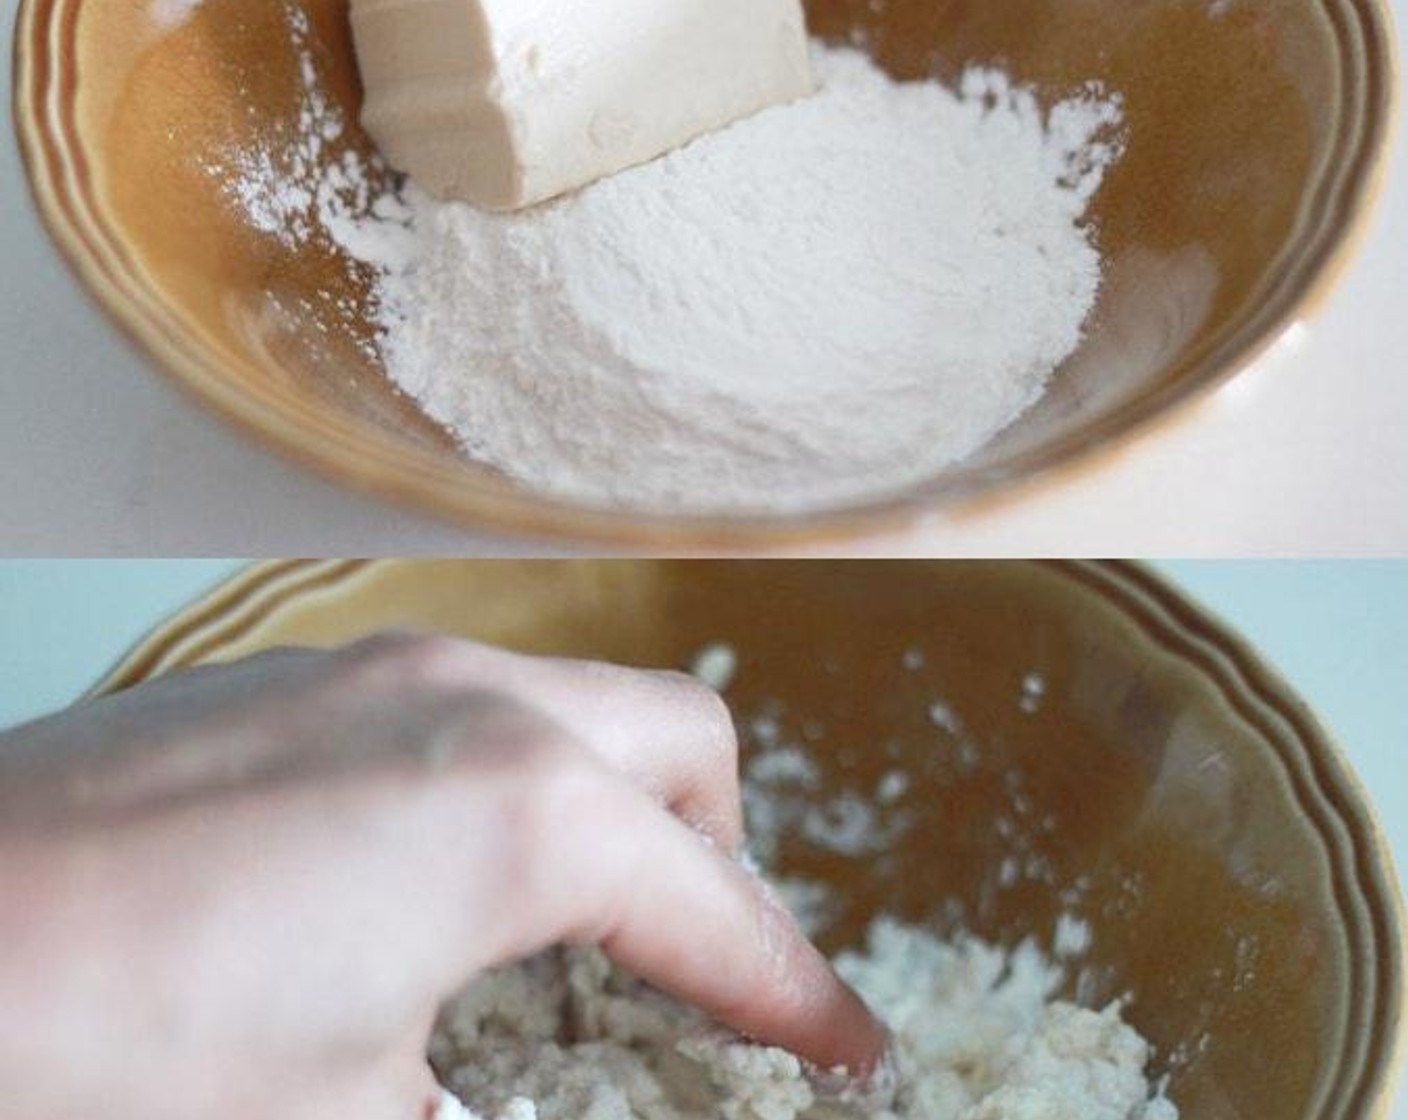 step 5 Mix the Sweet Glutinous Rice Flour (1/2 cup) and the Silken Tofu (2.5 oz). Knead with your hand until the dough becomes smooth. If the mixture is too try, add a little tofu till the dough is just right.